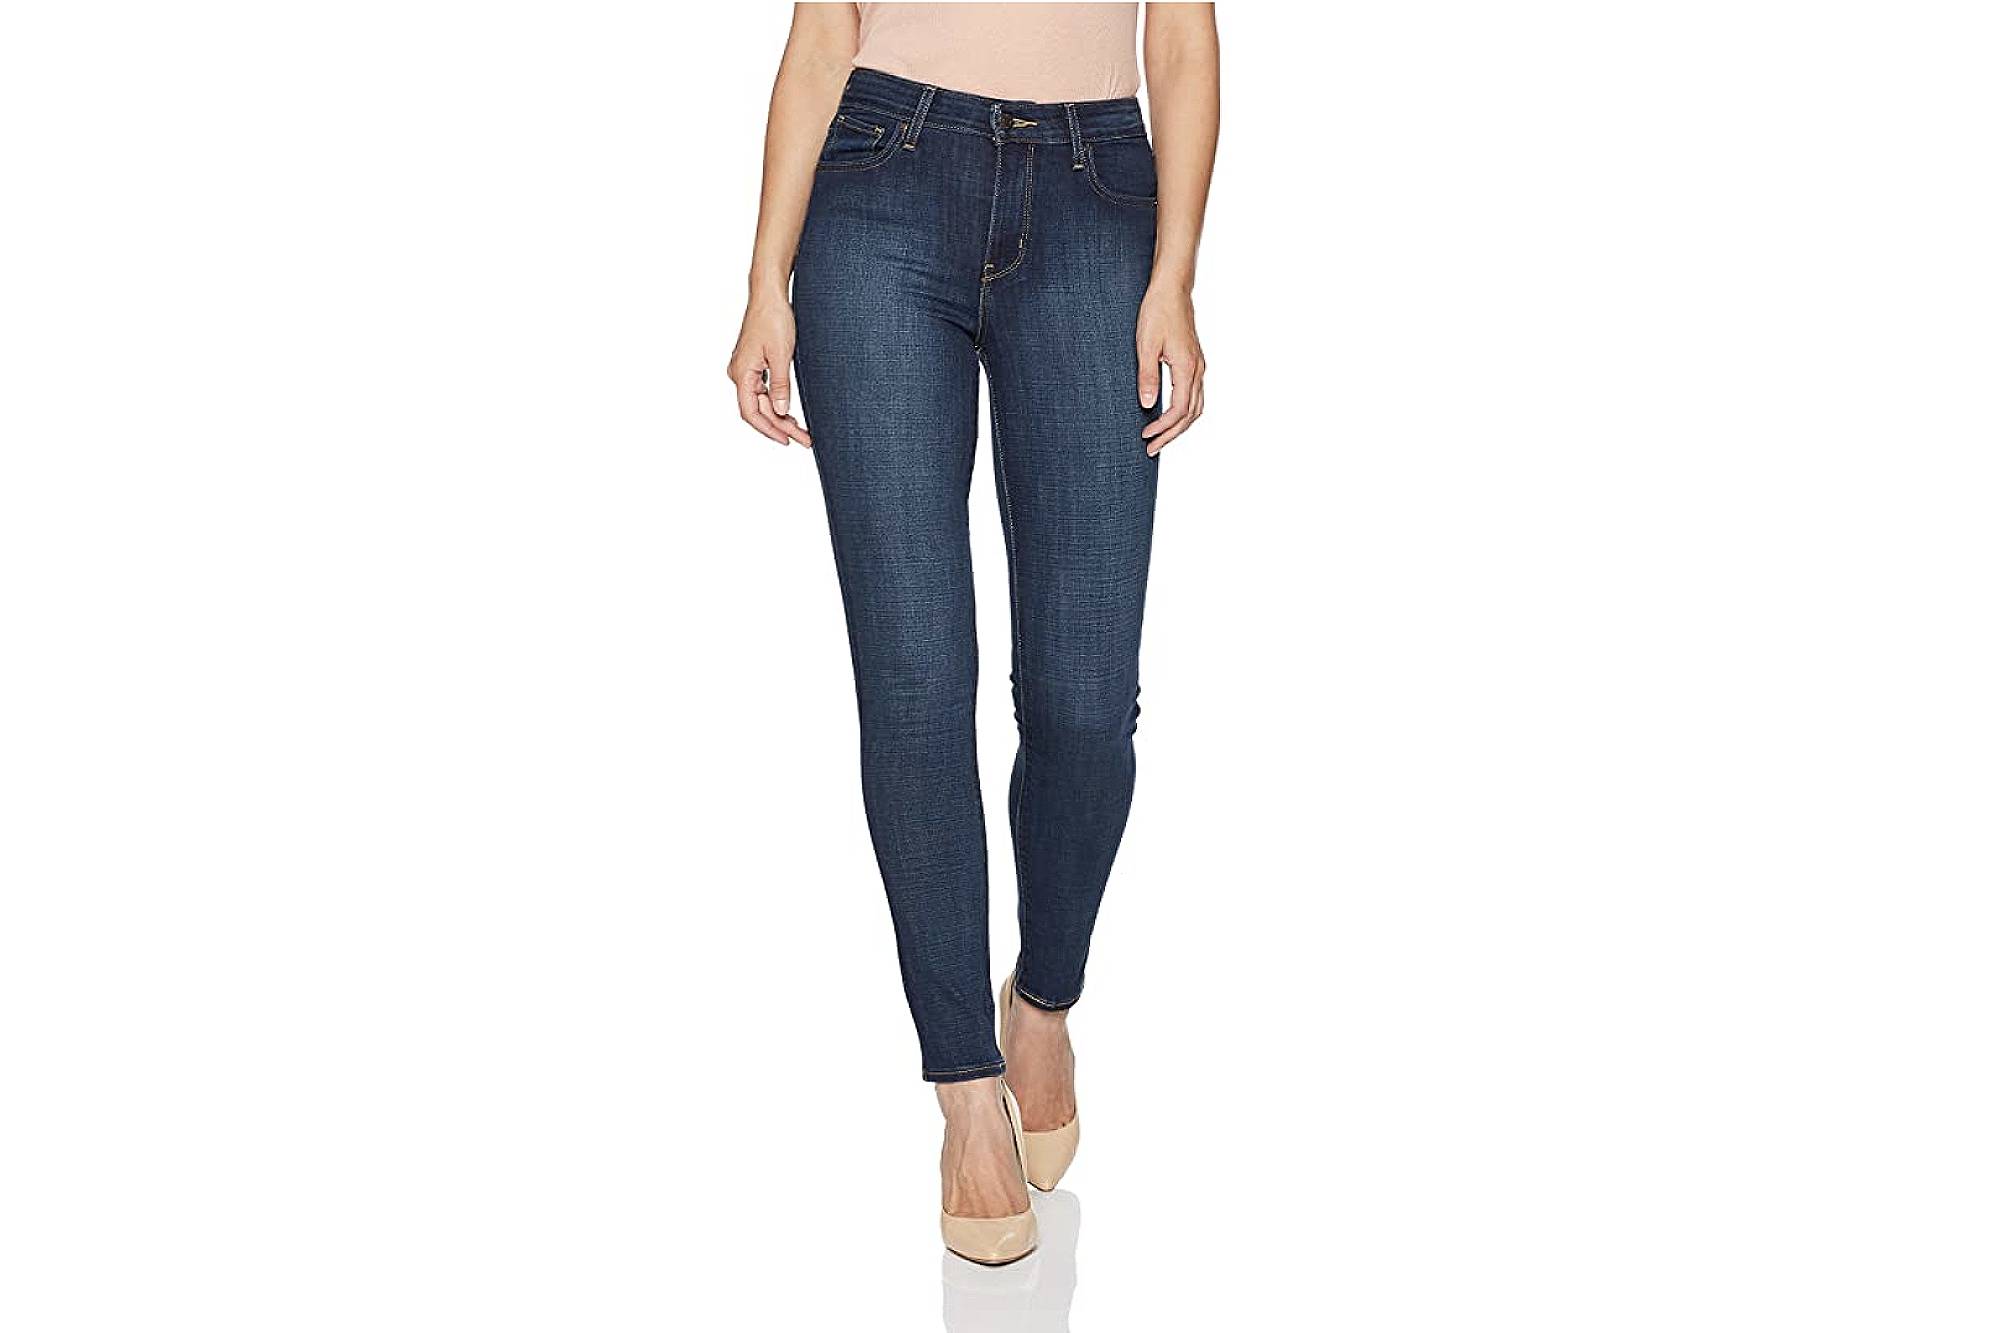 Levi's Classic Skinny Jeans Are on Sale for Up to 50% Off